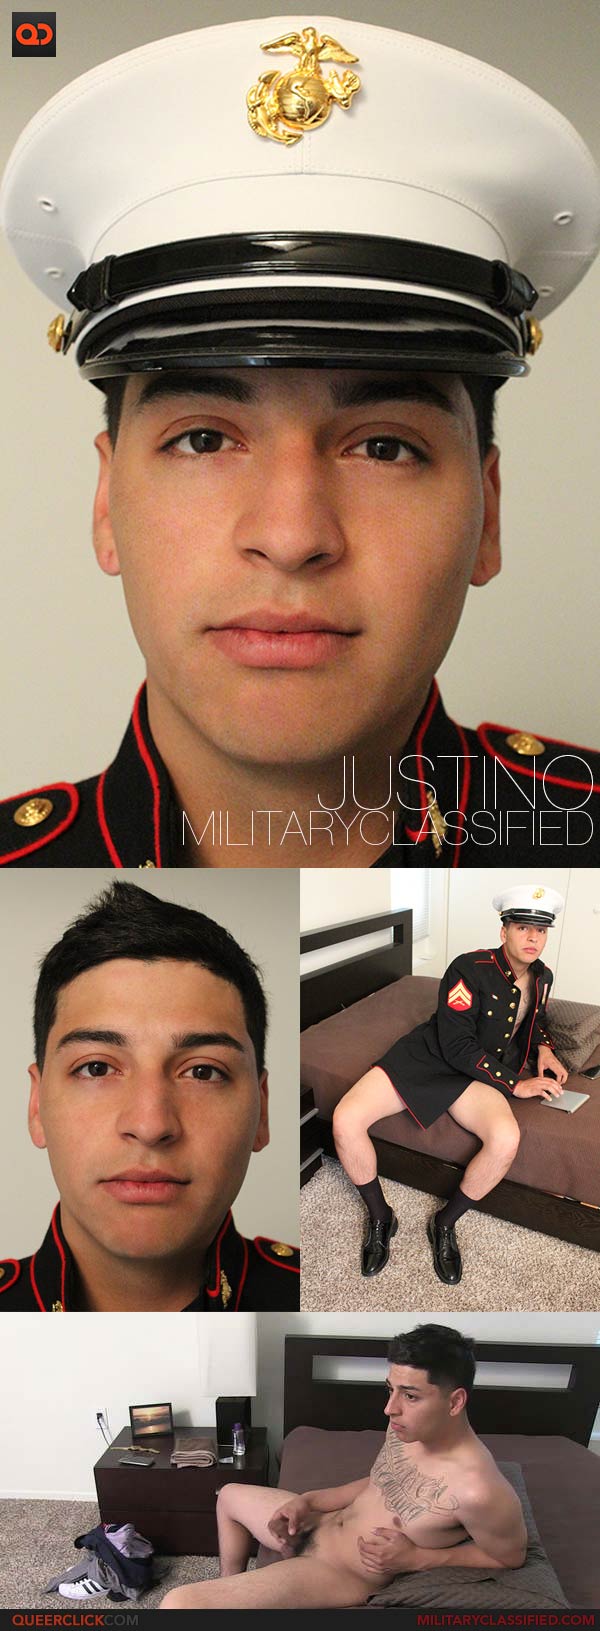 Military Classified: Justino